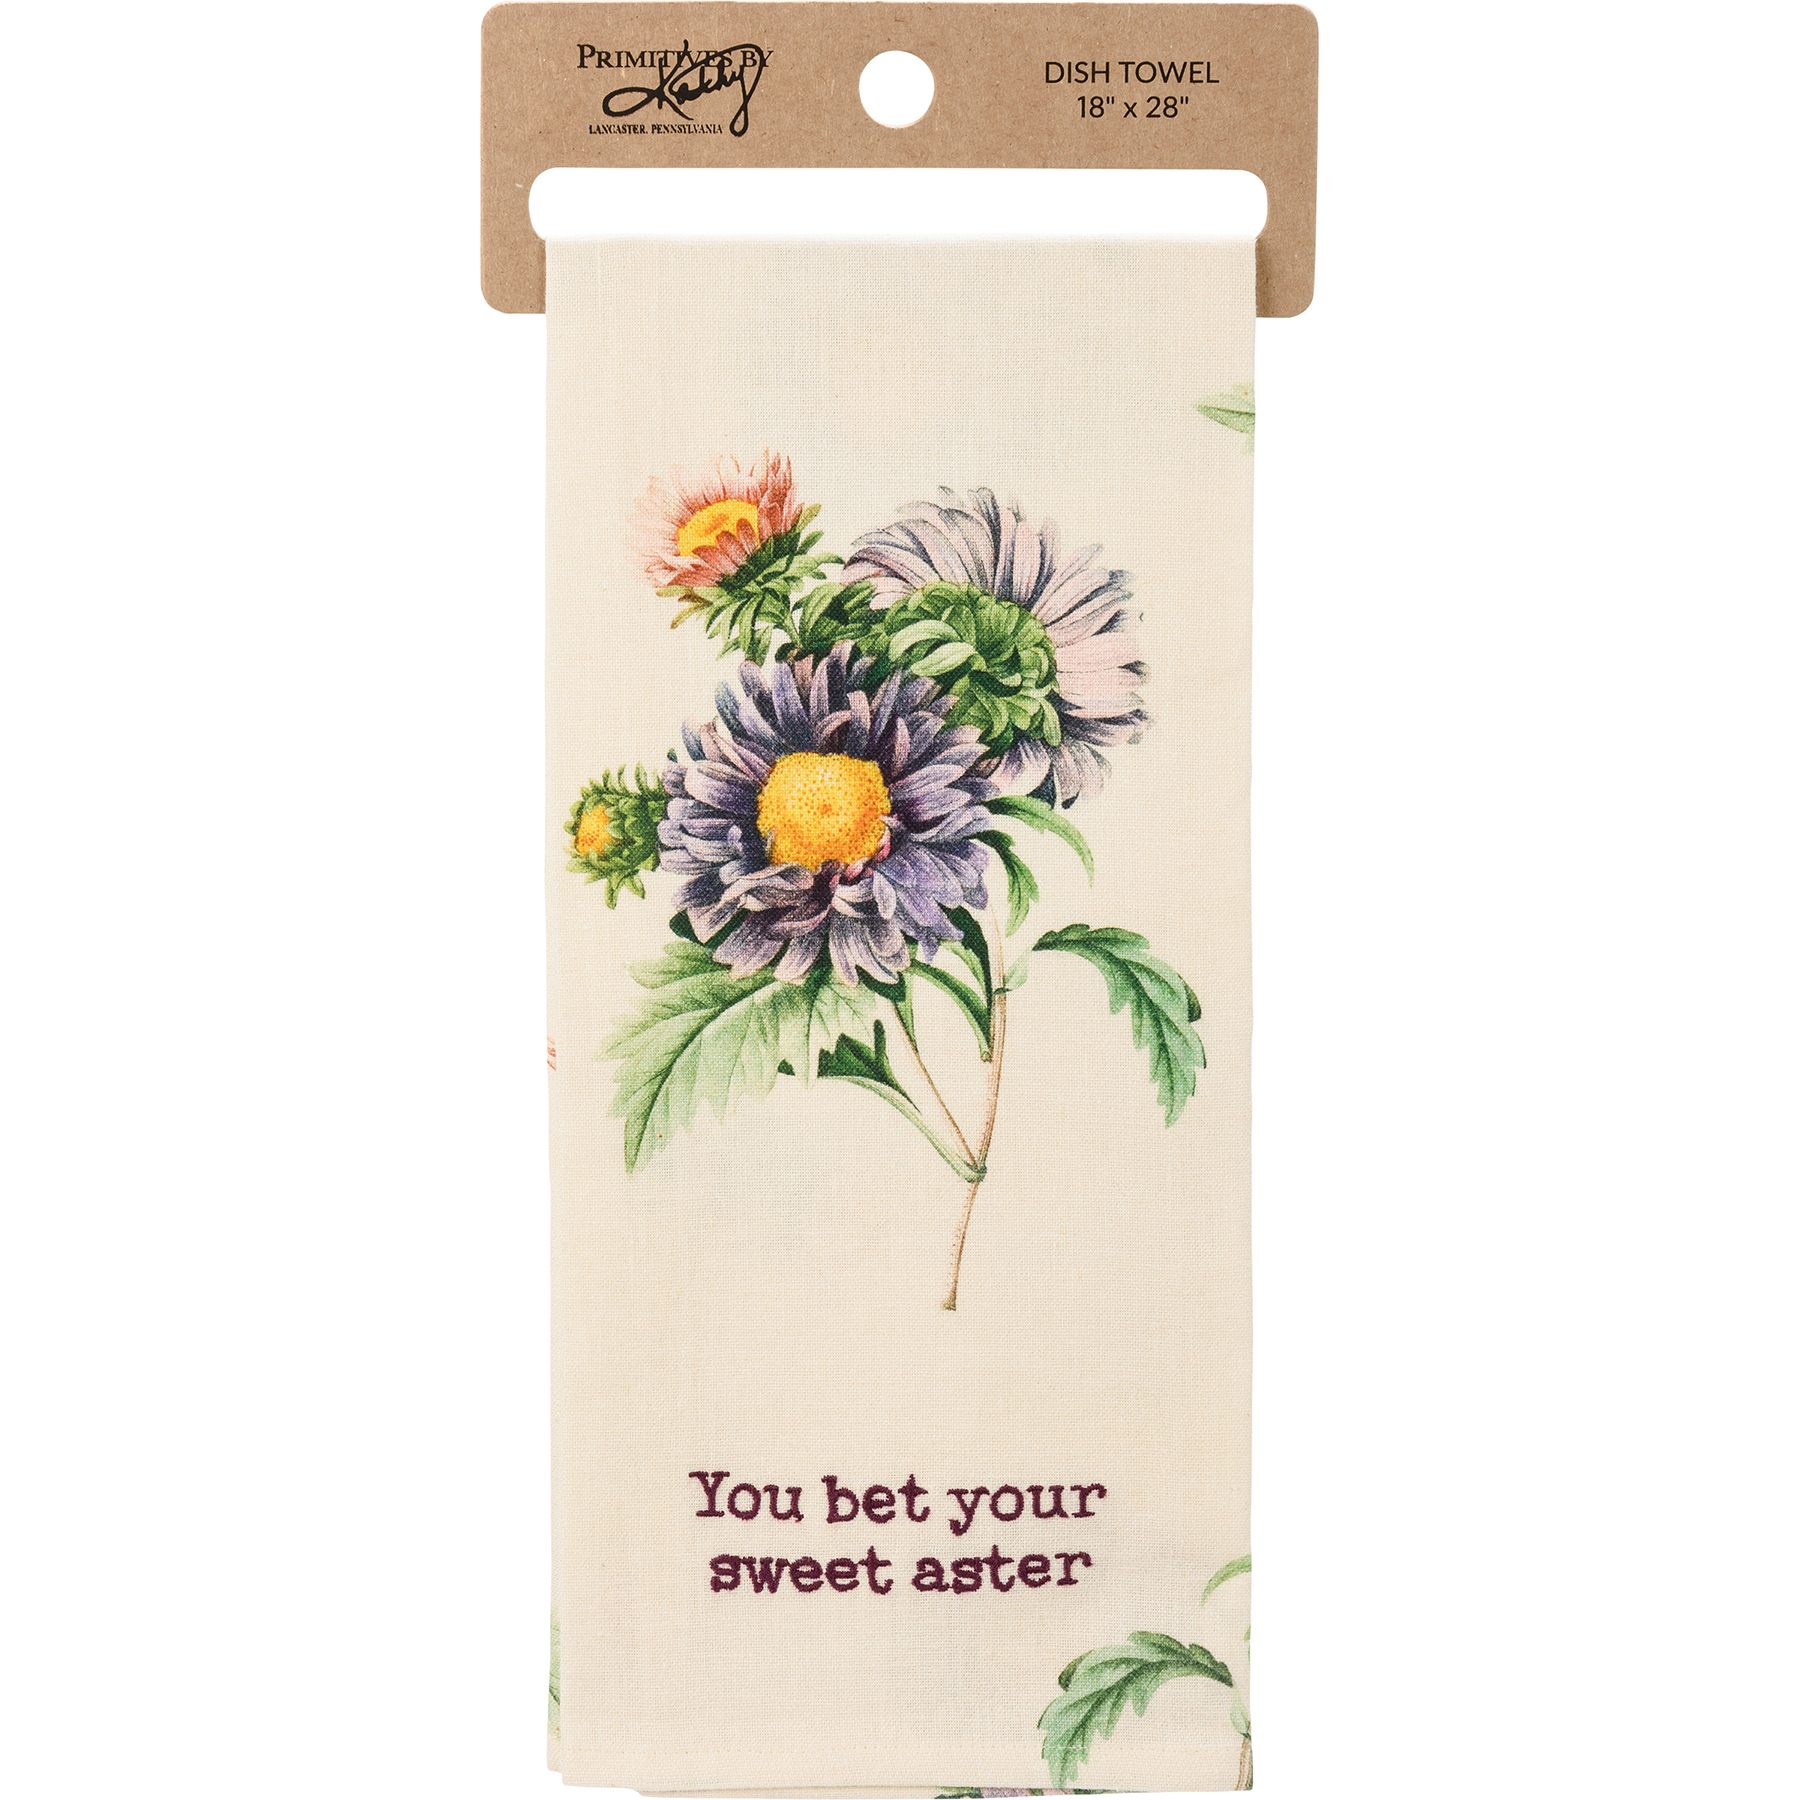 Primitives by Kathy 112006 Kitchen Towel I Lilac You A Lot, 28-Inch